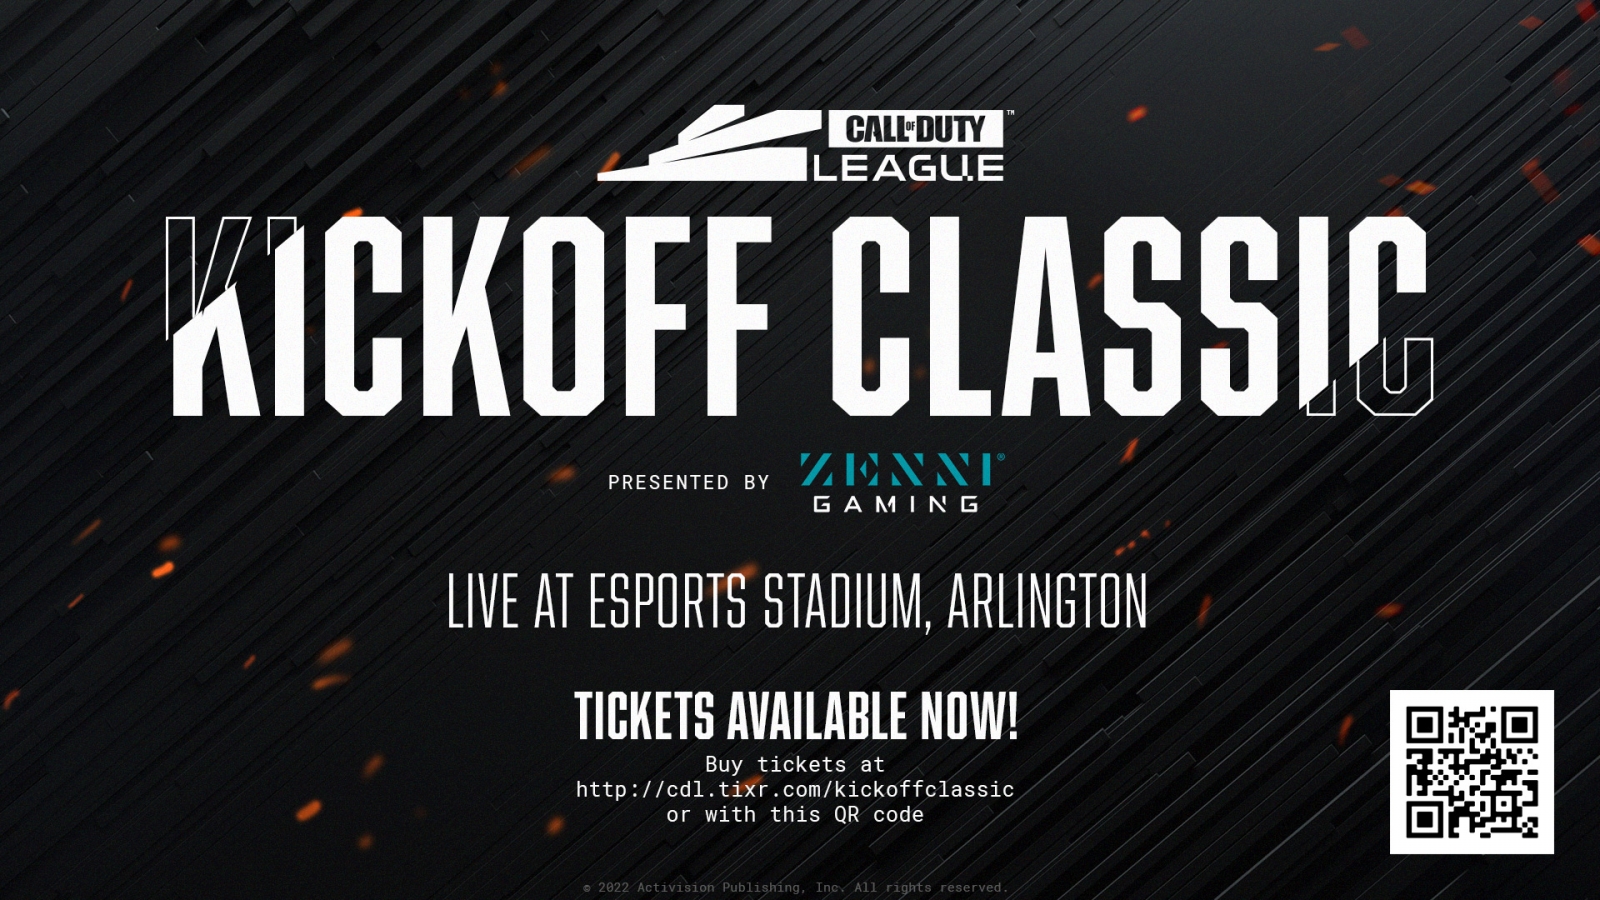 The 2022 Call Of Duty League Kickoff Classic!